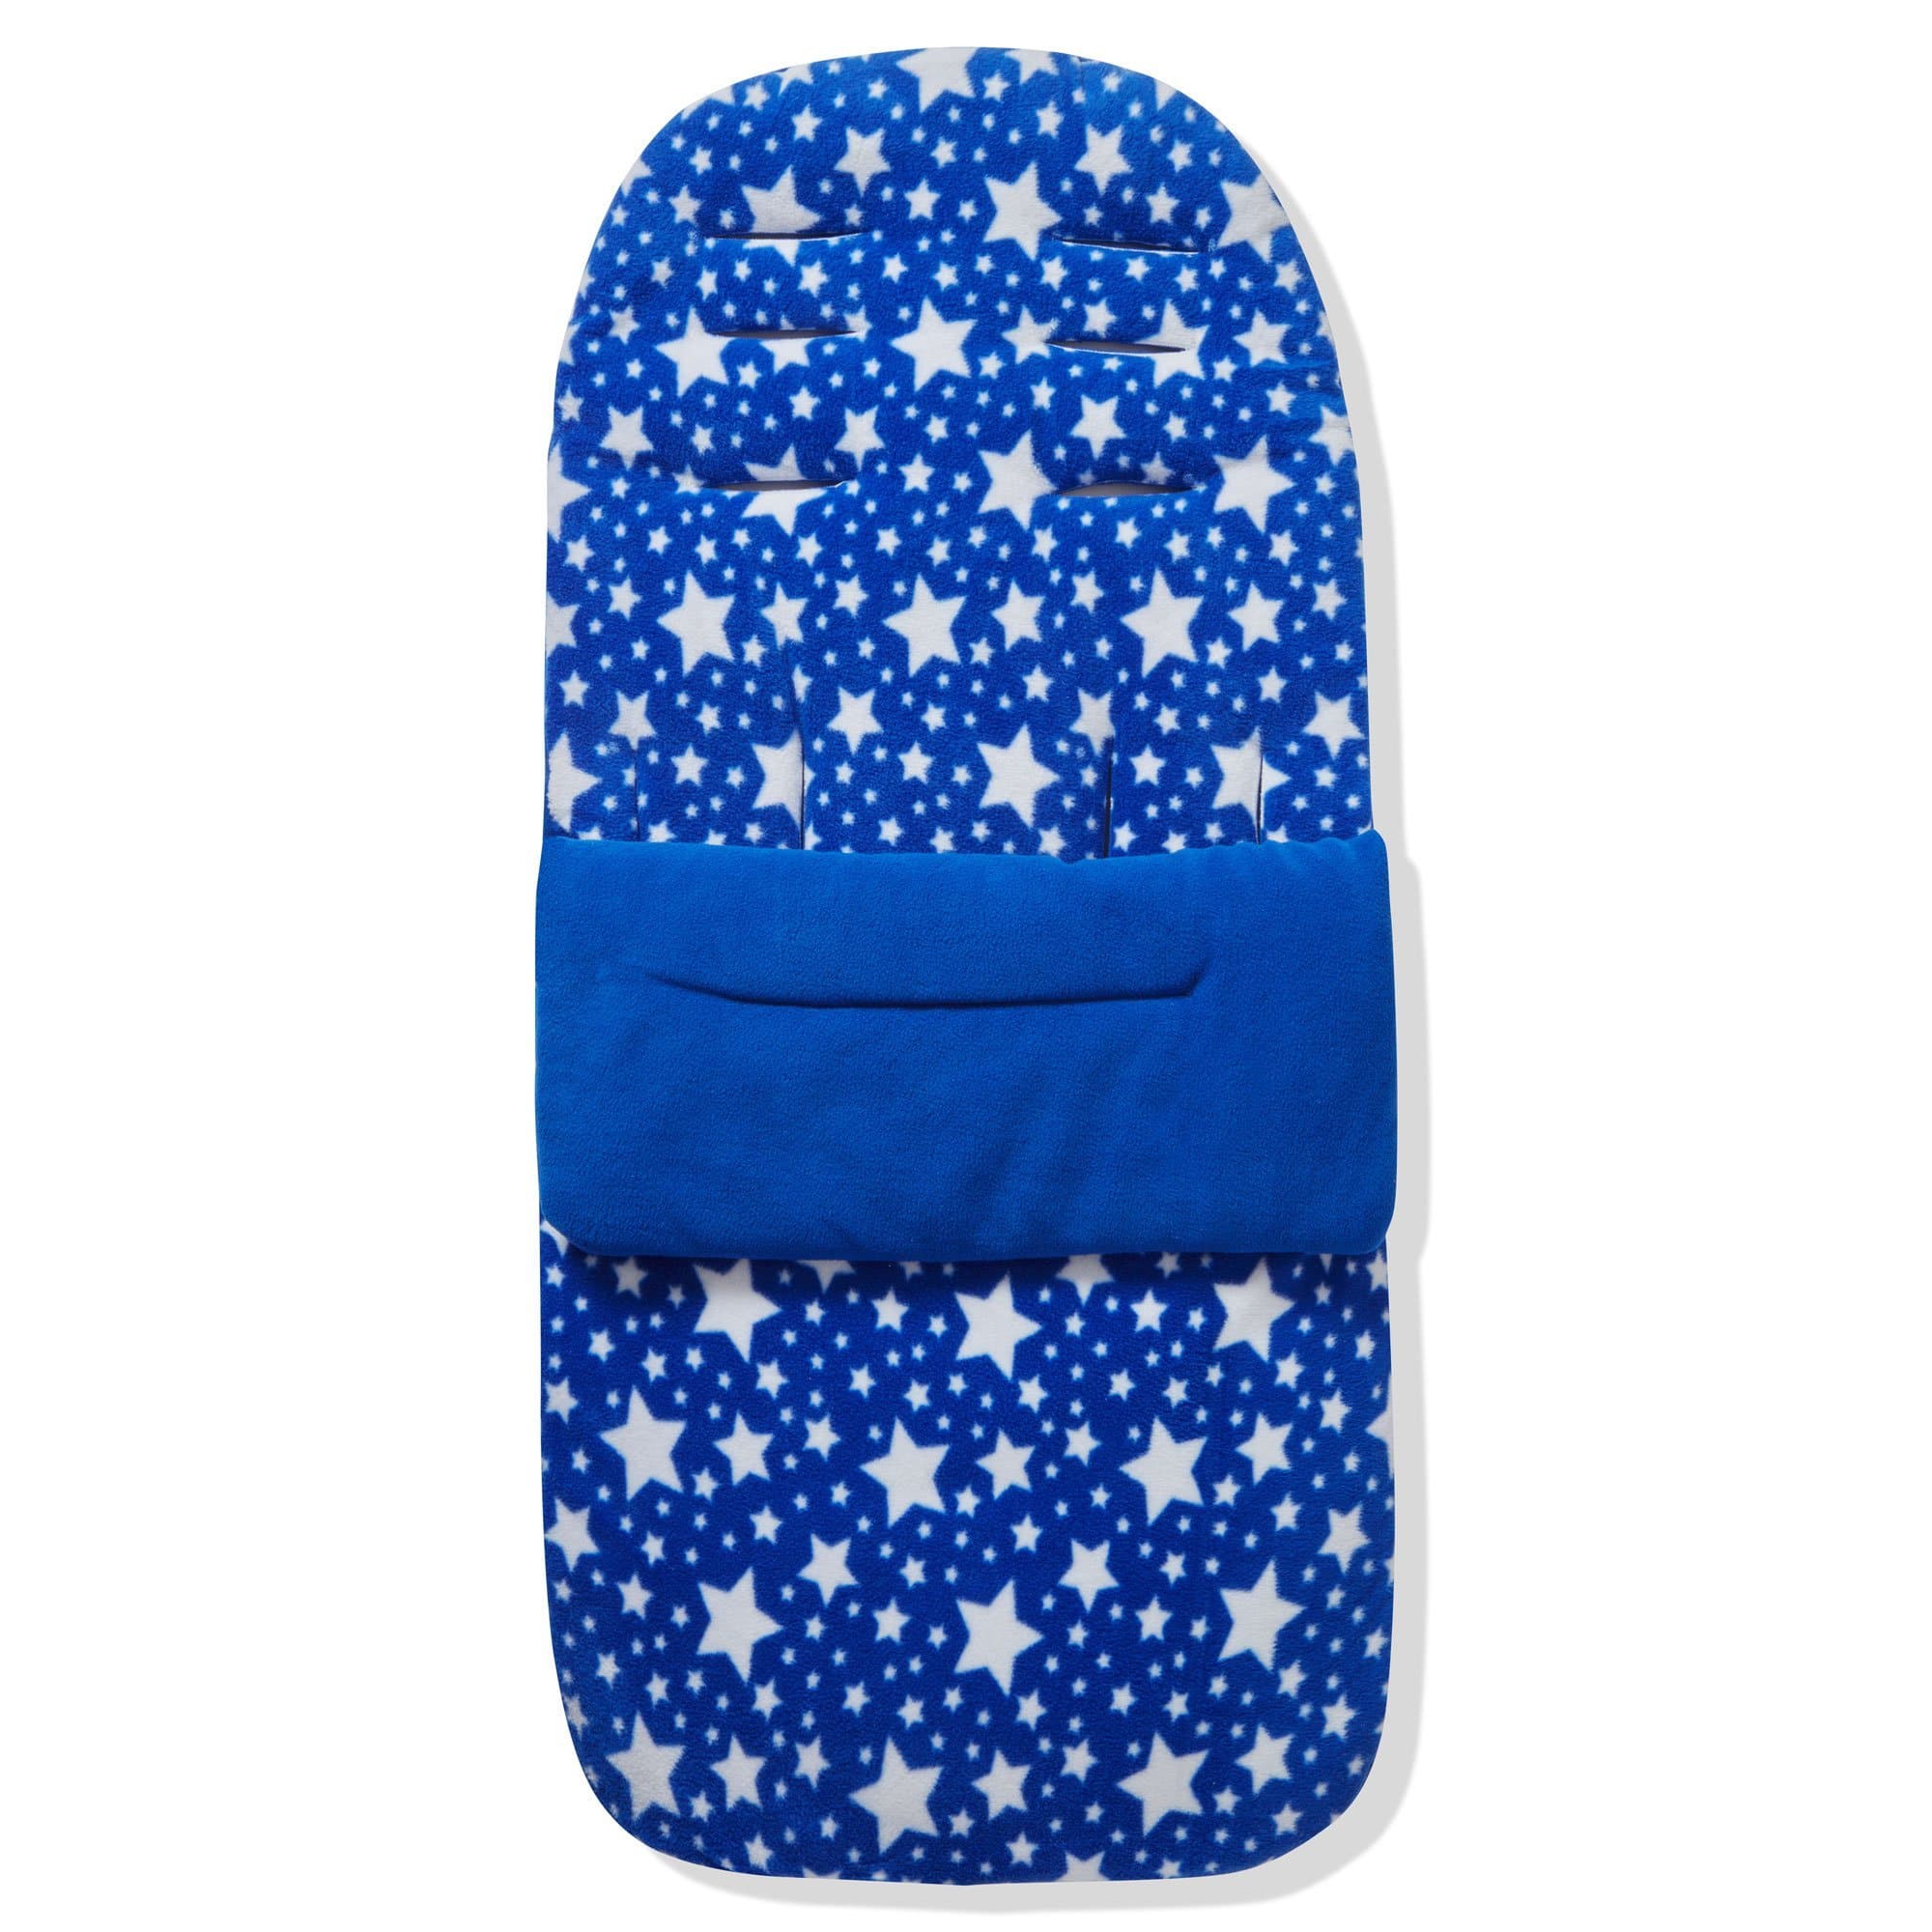 Fleece Footmuff / Cosy Toes Compatible With Chicco - Blue Star / Fits All Models | For Your Little One